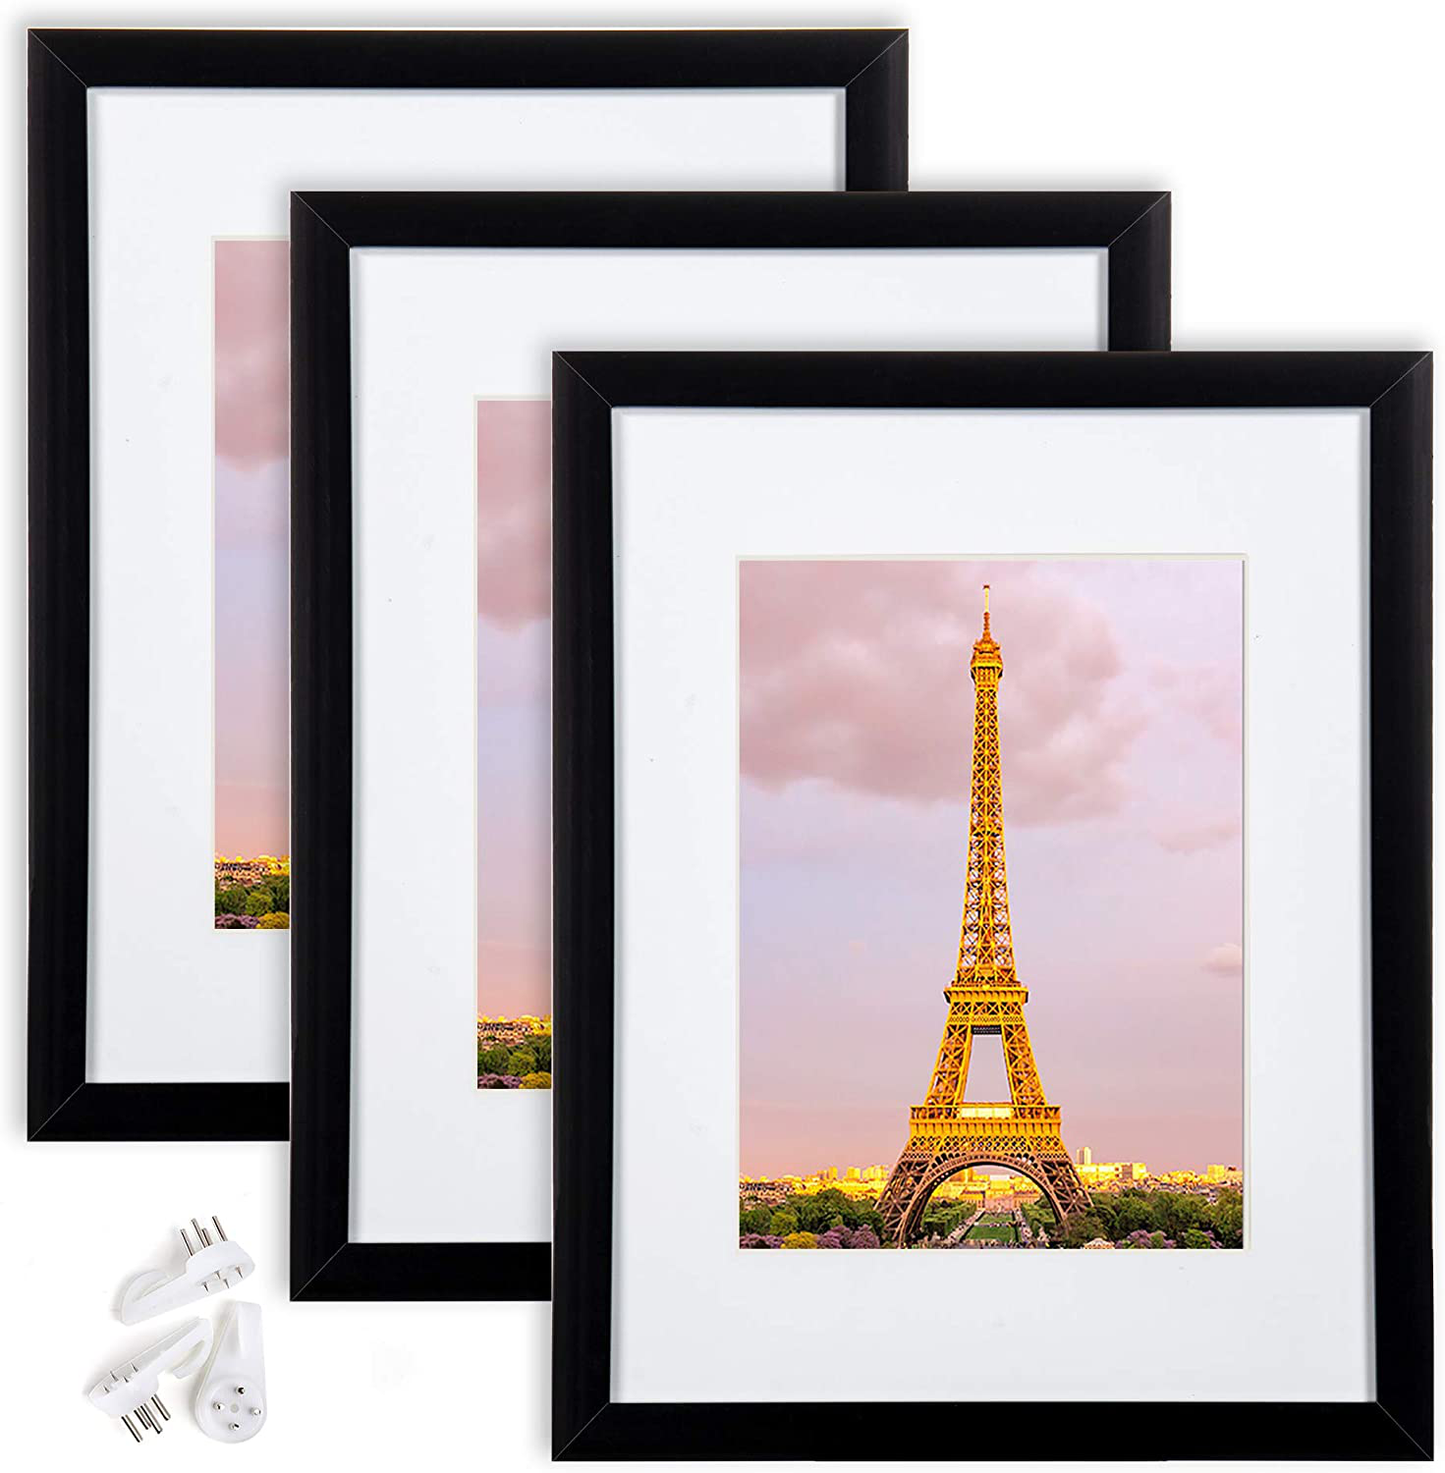 upsimples 8.5x11 Picture Frame Set of 3,Made of High Definition Glass for 6x8 with Mat or 8.5x11 Without Mat,Wall Mounting Photo Frame Ash Gray